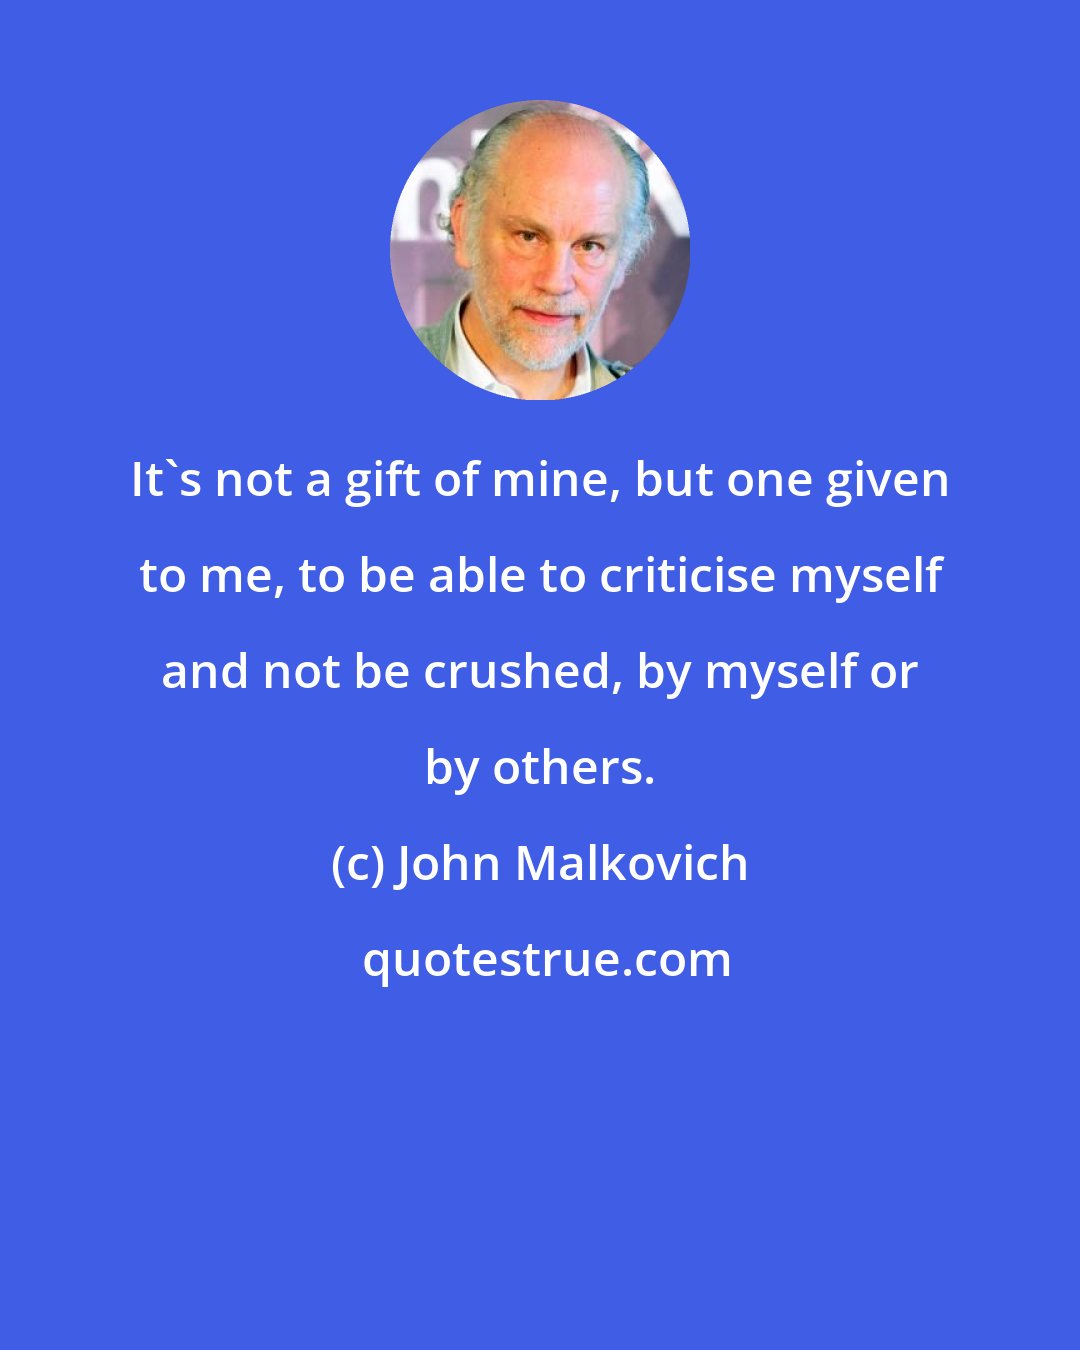 John Malkovich: It's not a gift of mine, but one given to me, to be able to criticise myself and not be crushed, by myself or by others.